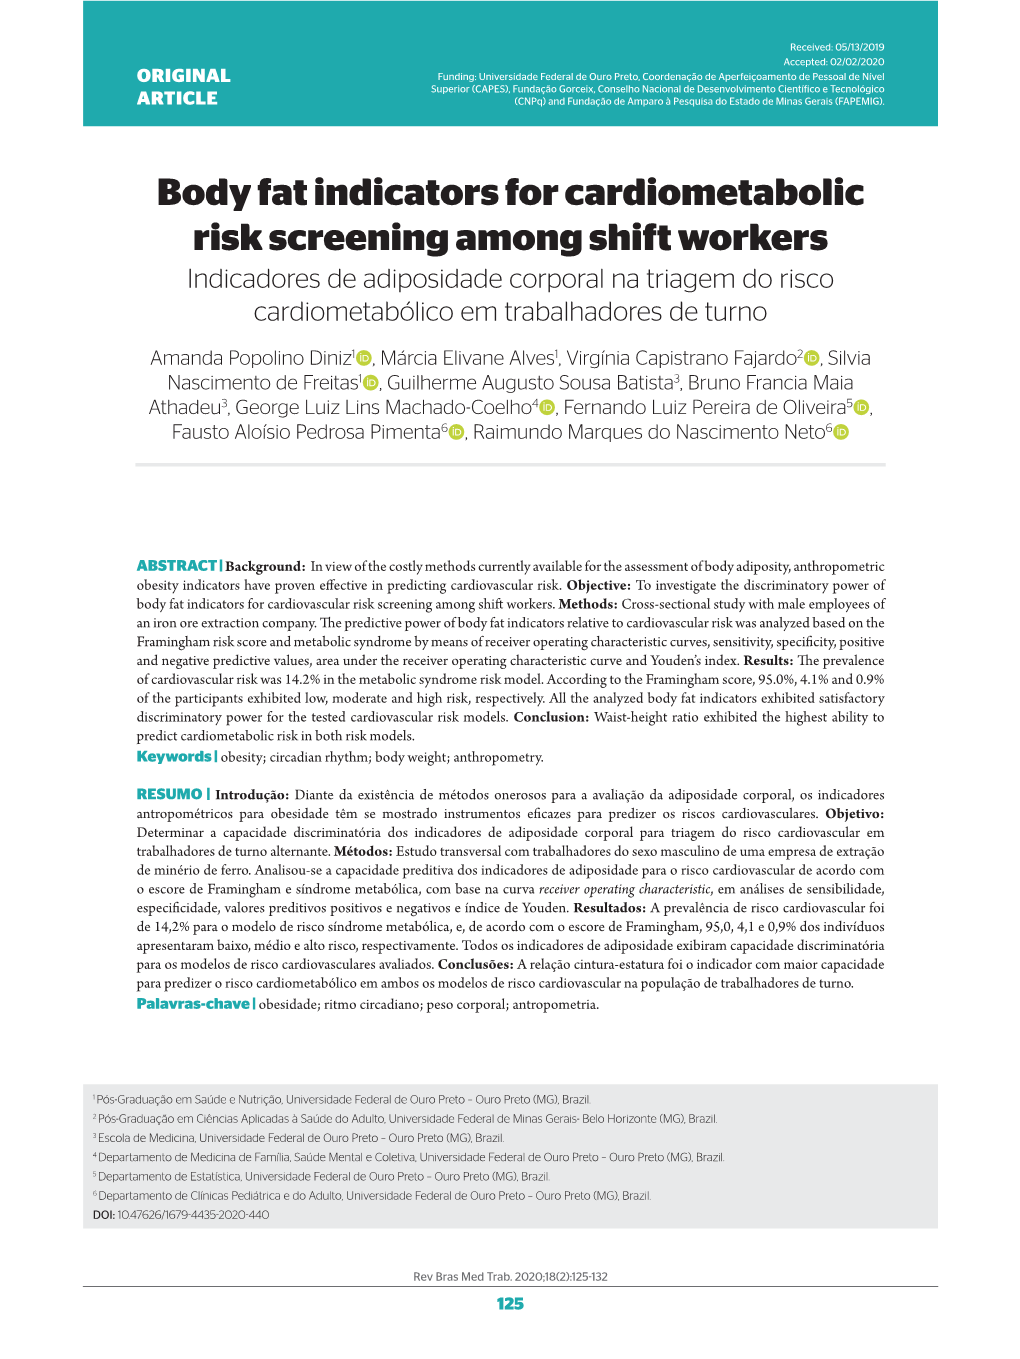 Body Fat Indicators for Cardiometabolic Risk Screening Among Shift Workers